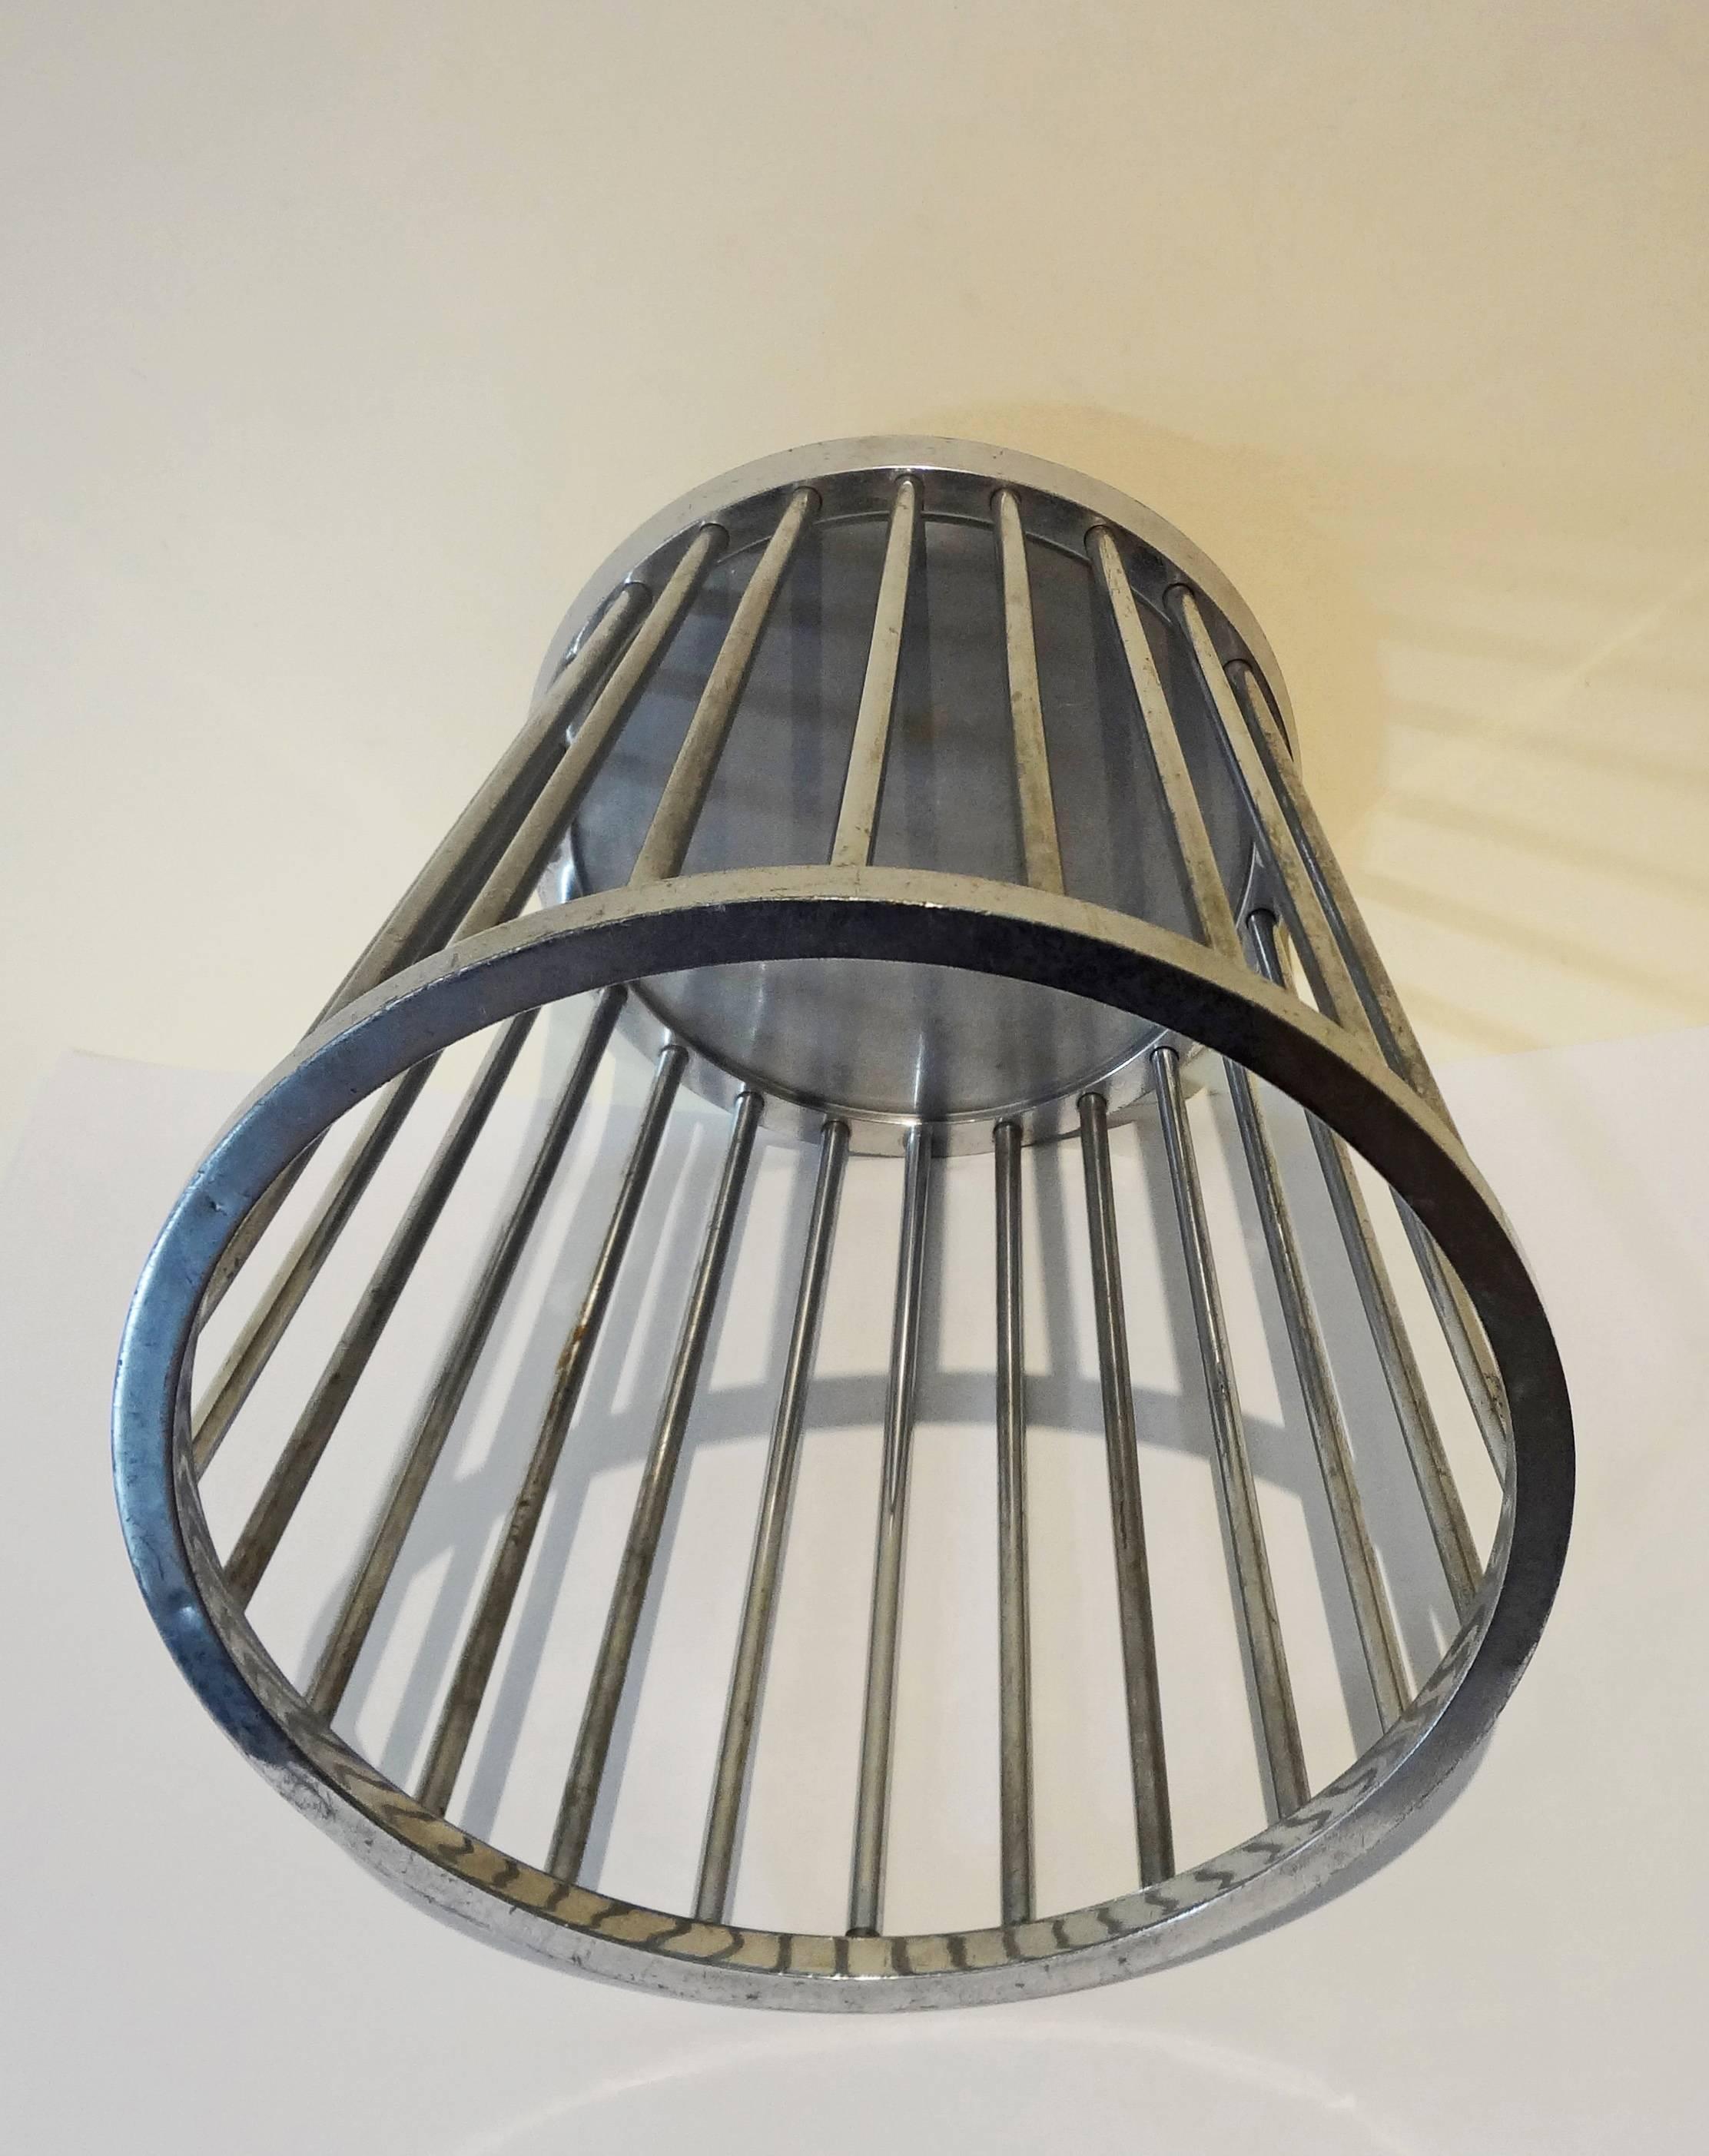 French Steel Wastebasket by Jacques Adnet, 1930